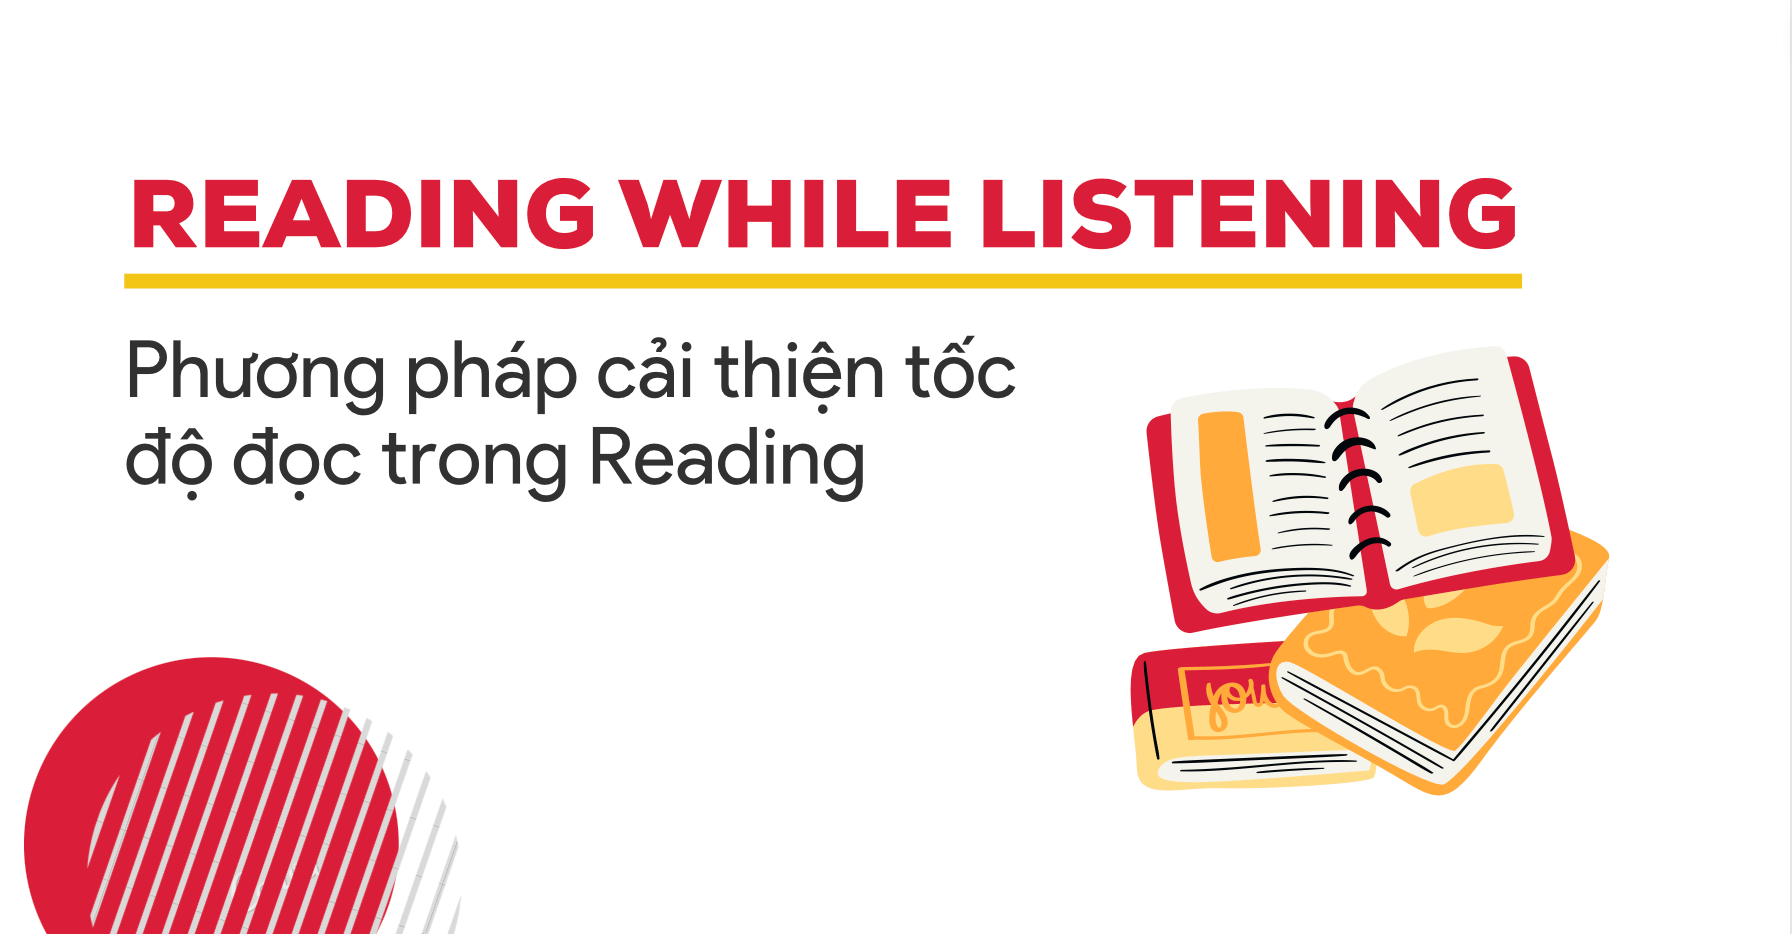 reading while listening rwl phuong phap cai thien toc do doc trong reading